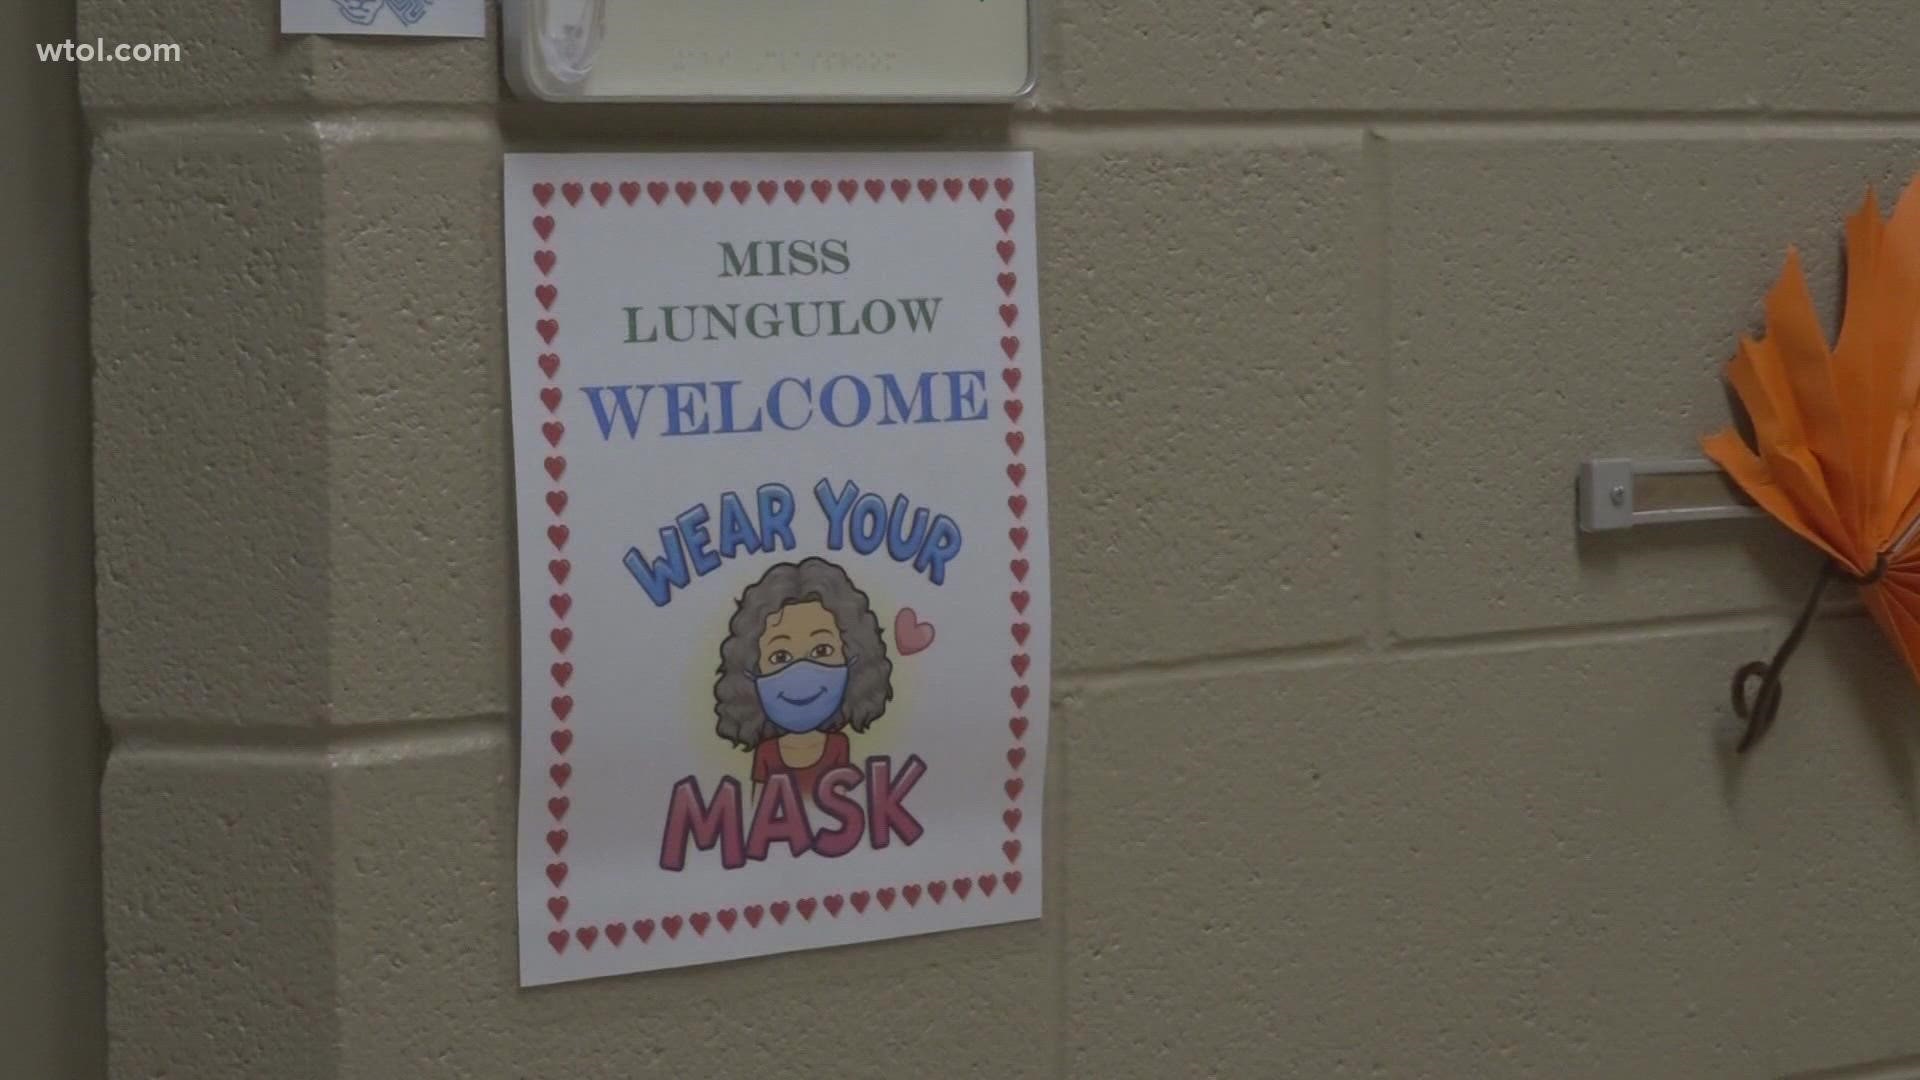 Staff members are to start wearing masks starting Tuesday and all students must be in masks starting the first day of school.